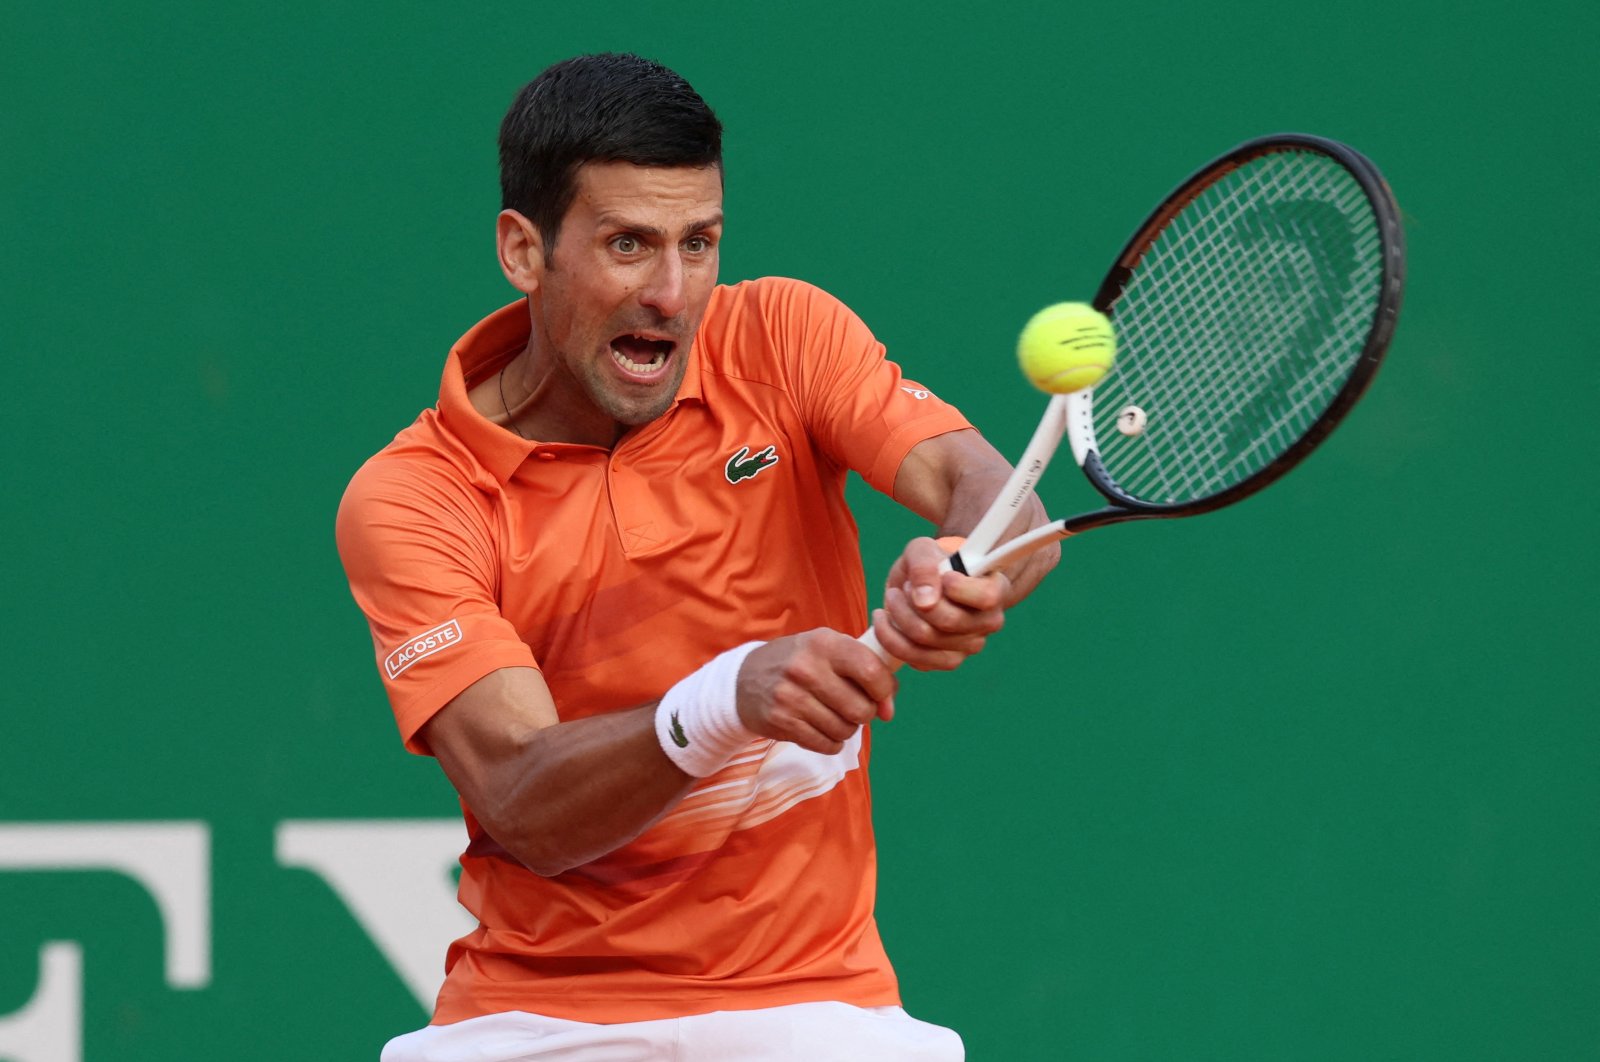 Novak Djokovic in action during at the Monte Carlo Masters, Roquebrune-Cap-Martin, France, April 12, 2022. (Reuters Photo)